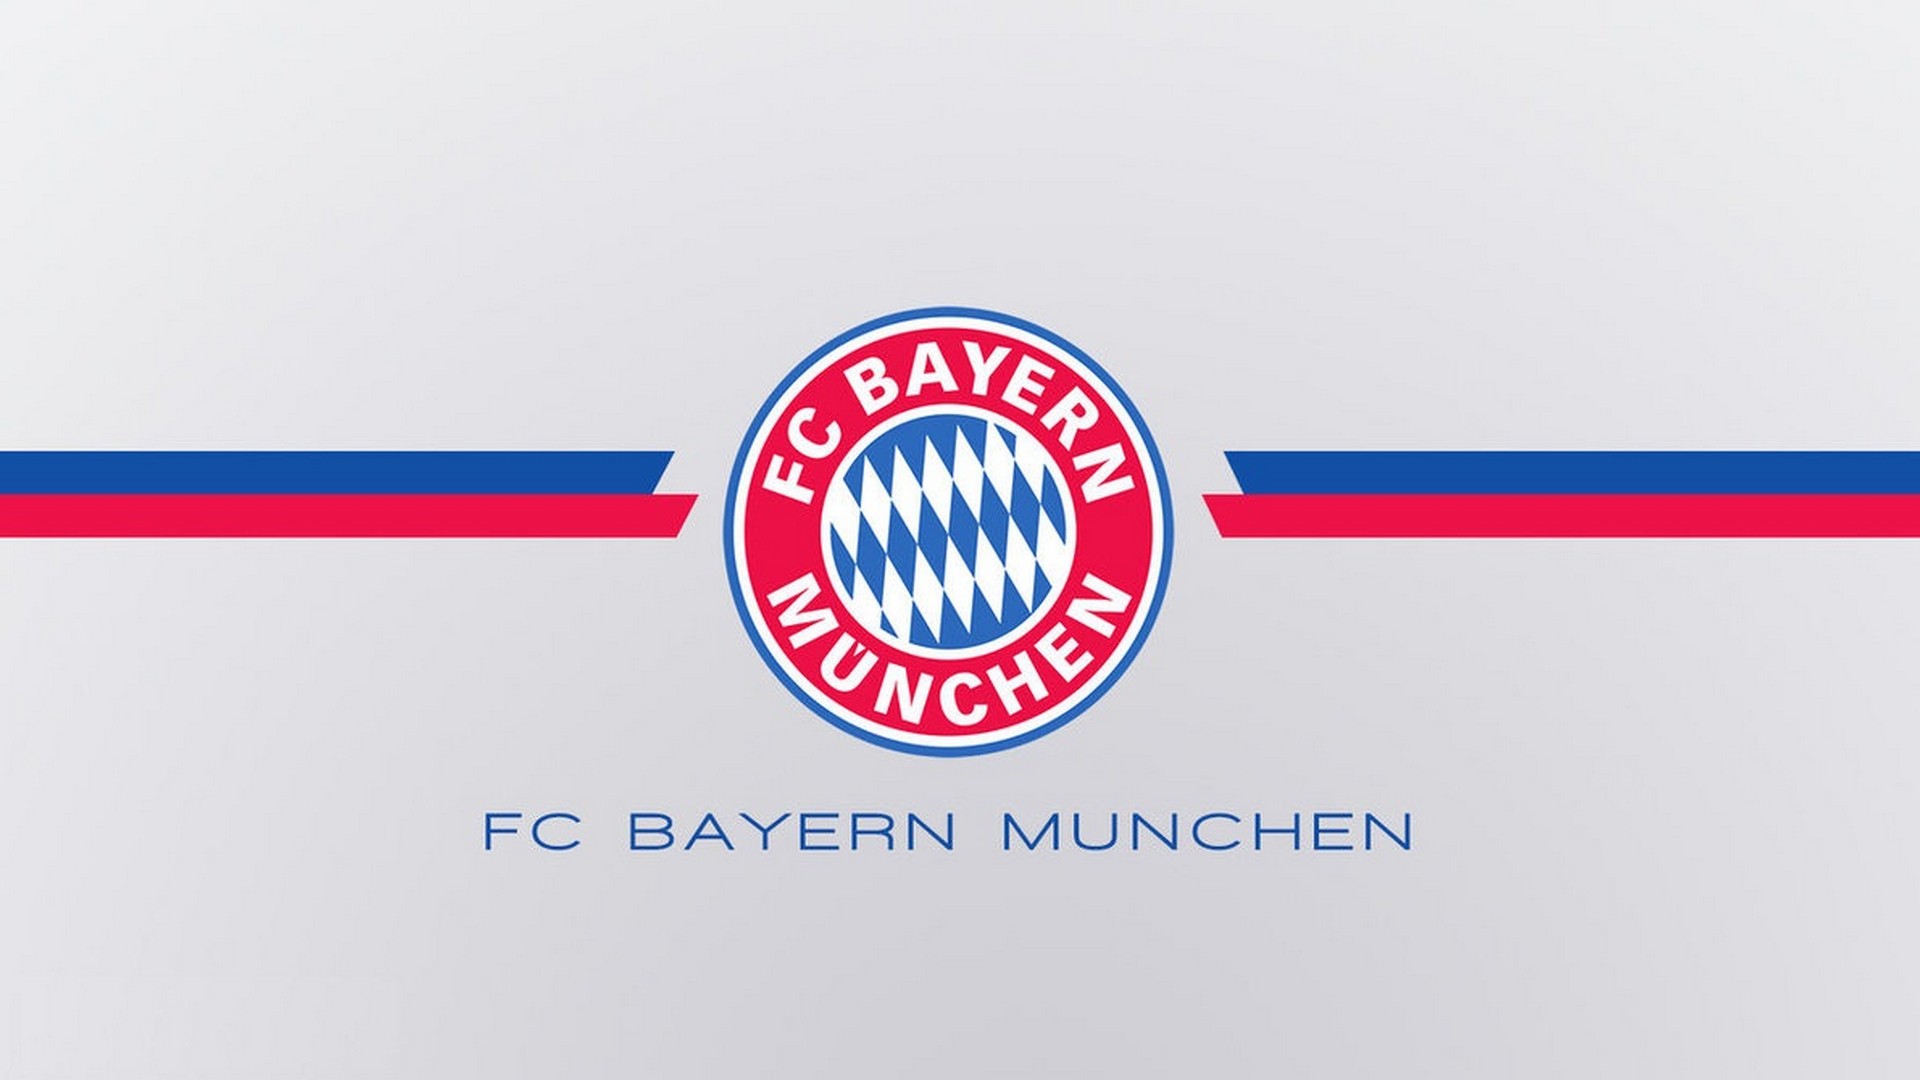 HD FC Bayern Munchen Backgrounds With Resolution 1920X1080 pixel. You can make this wallpaper for your Mac or Windows Desktop Background, iPhone, Android or Tablet and another Smartphone device for free